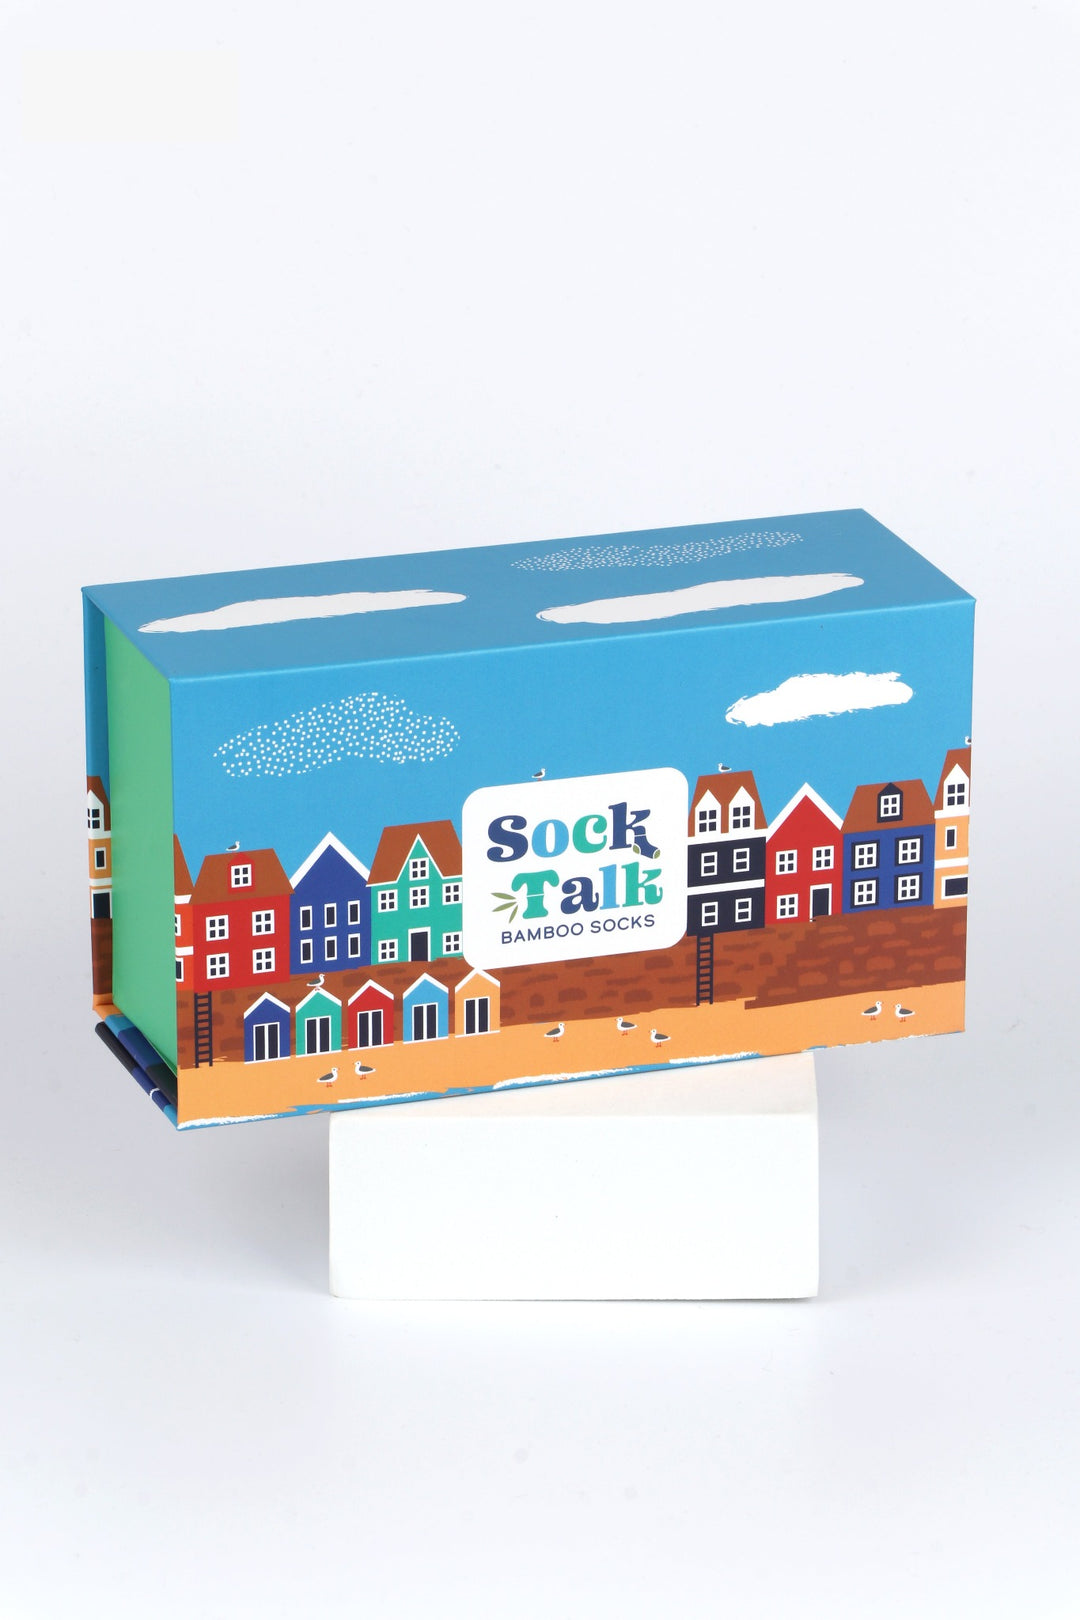 a sock gift box which fits three pairs of bamboo socks artistically designed to look like a seaside village scene with beach and colourful beach huts